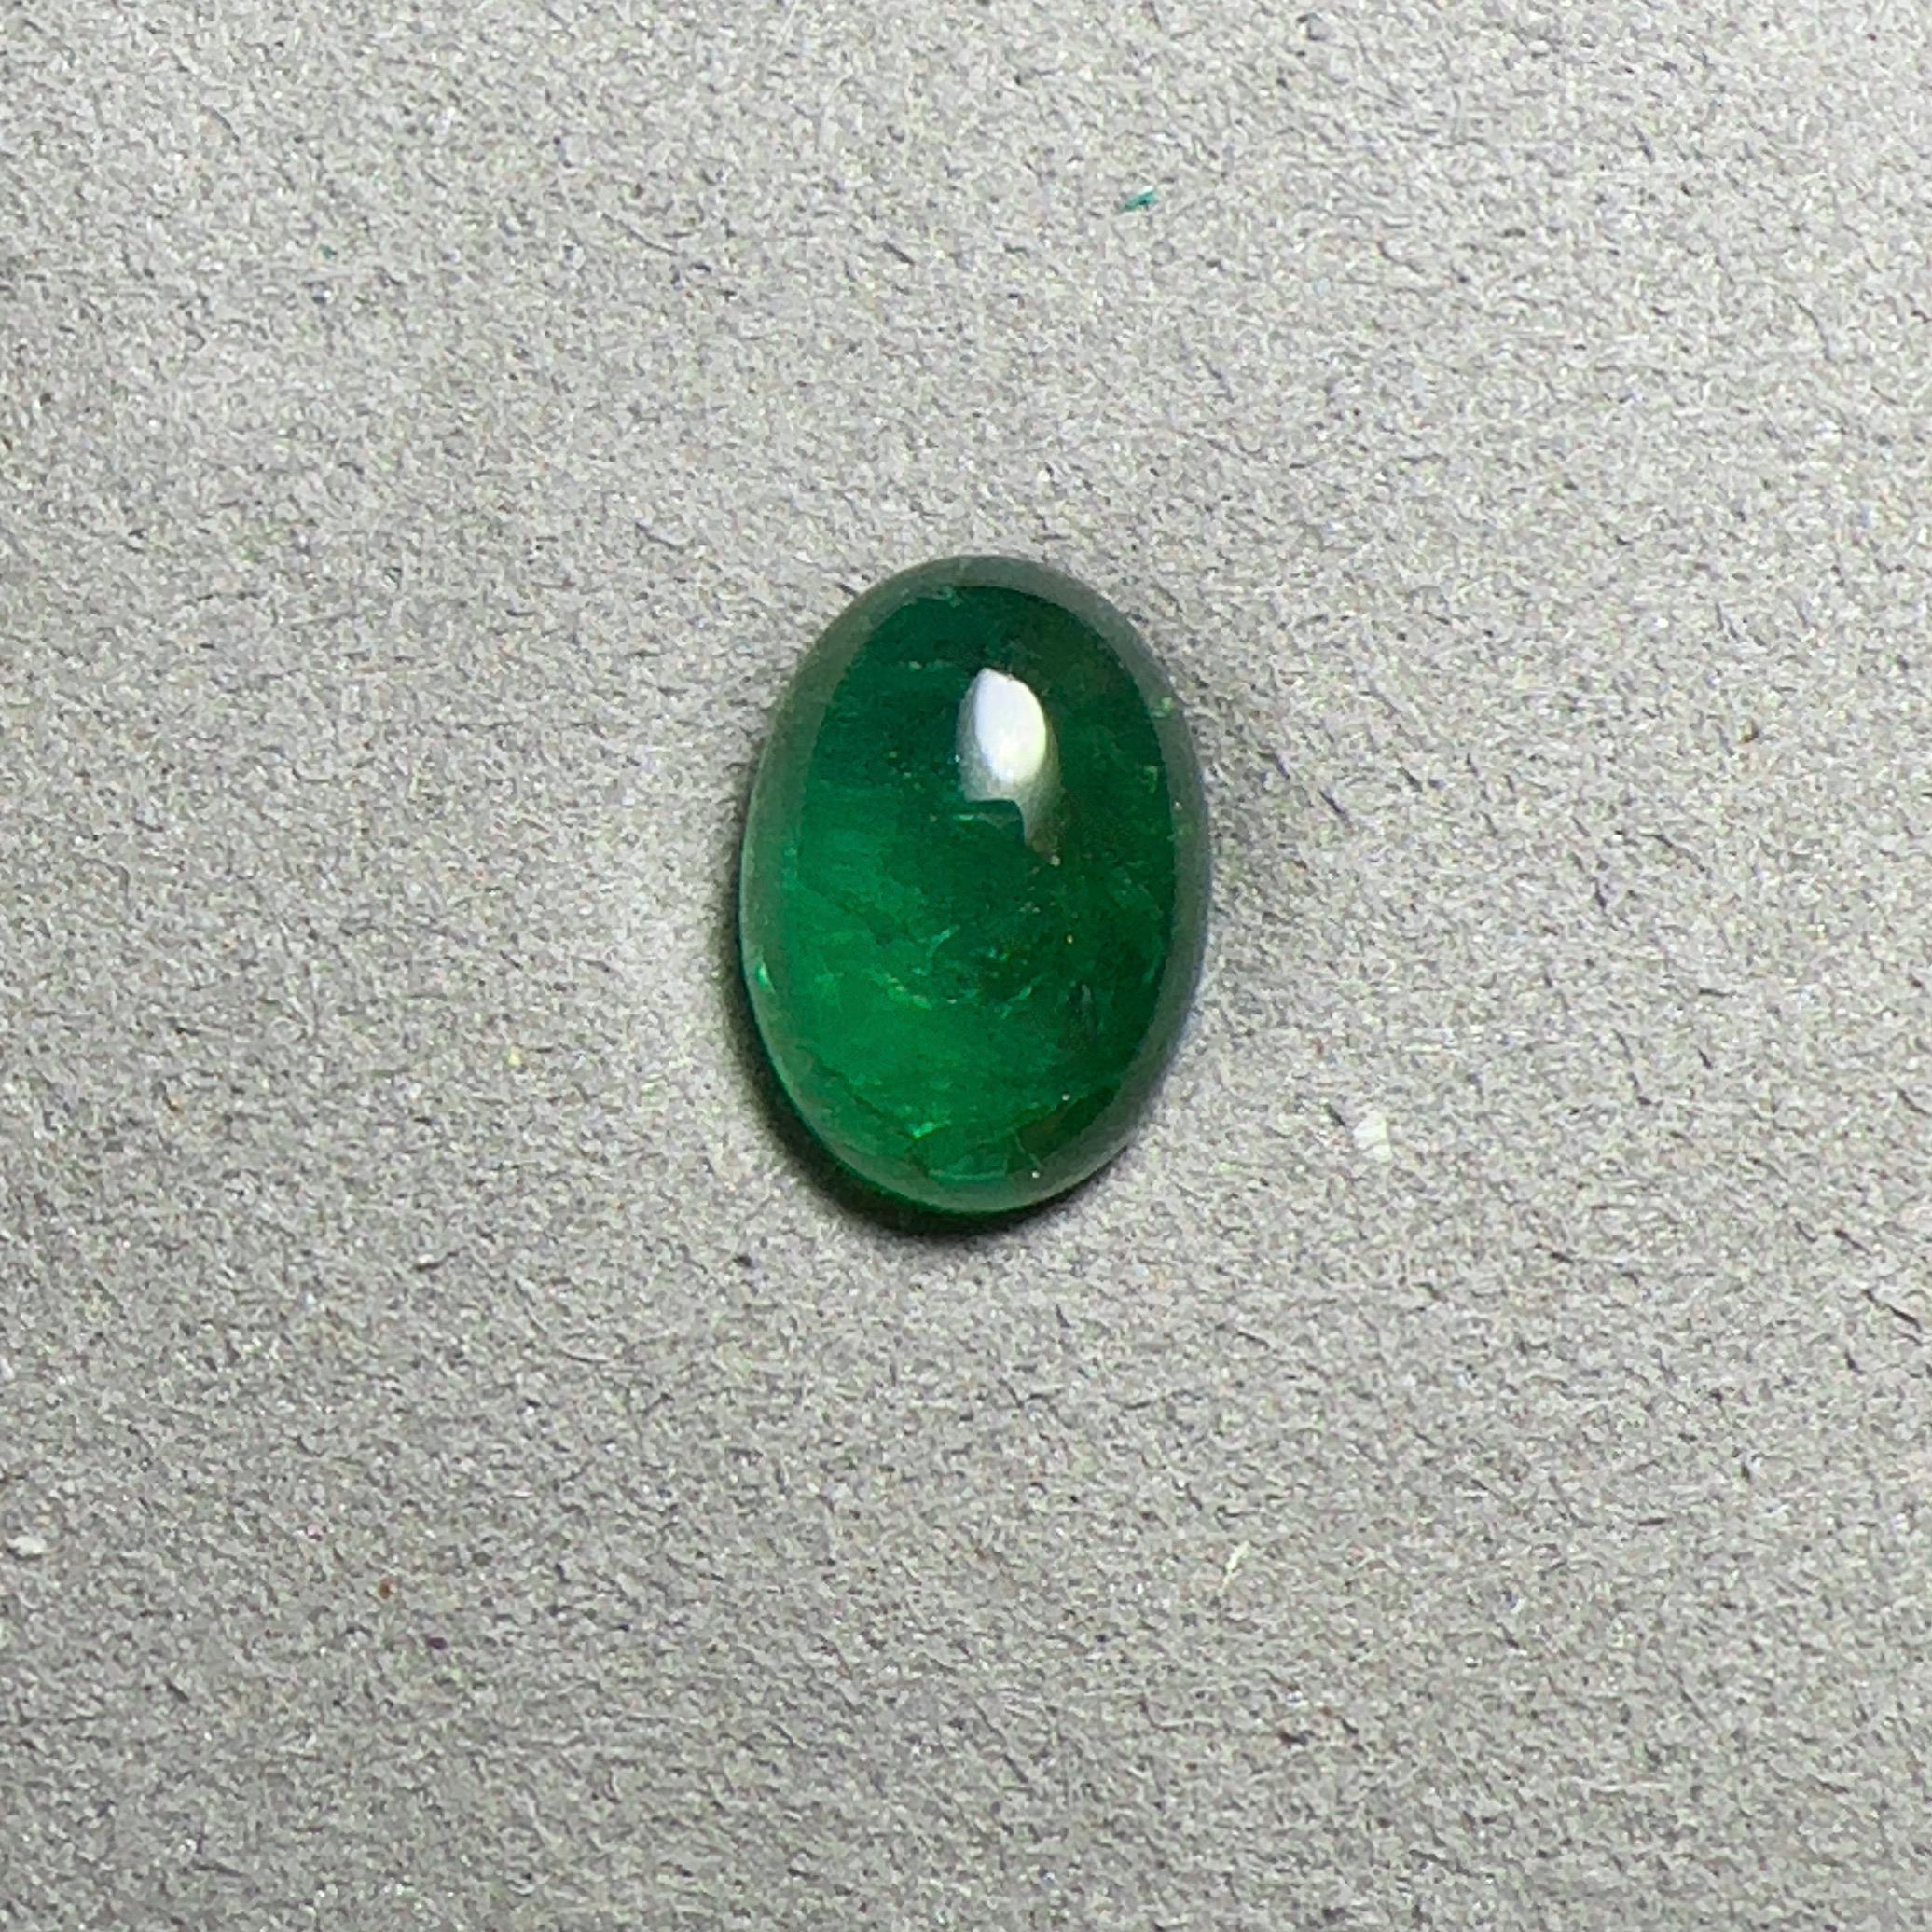 A loose Zambia cabochon gem 
weight : 4.10 ct
Vivid green colour




Emerald’s lush green has soothed souls and excited imaginations since antiquity. Its name comes from the ancient Greek word for green, “smaragdus.” Rome’s Pliny the Elder described